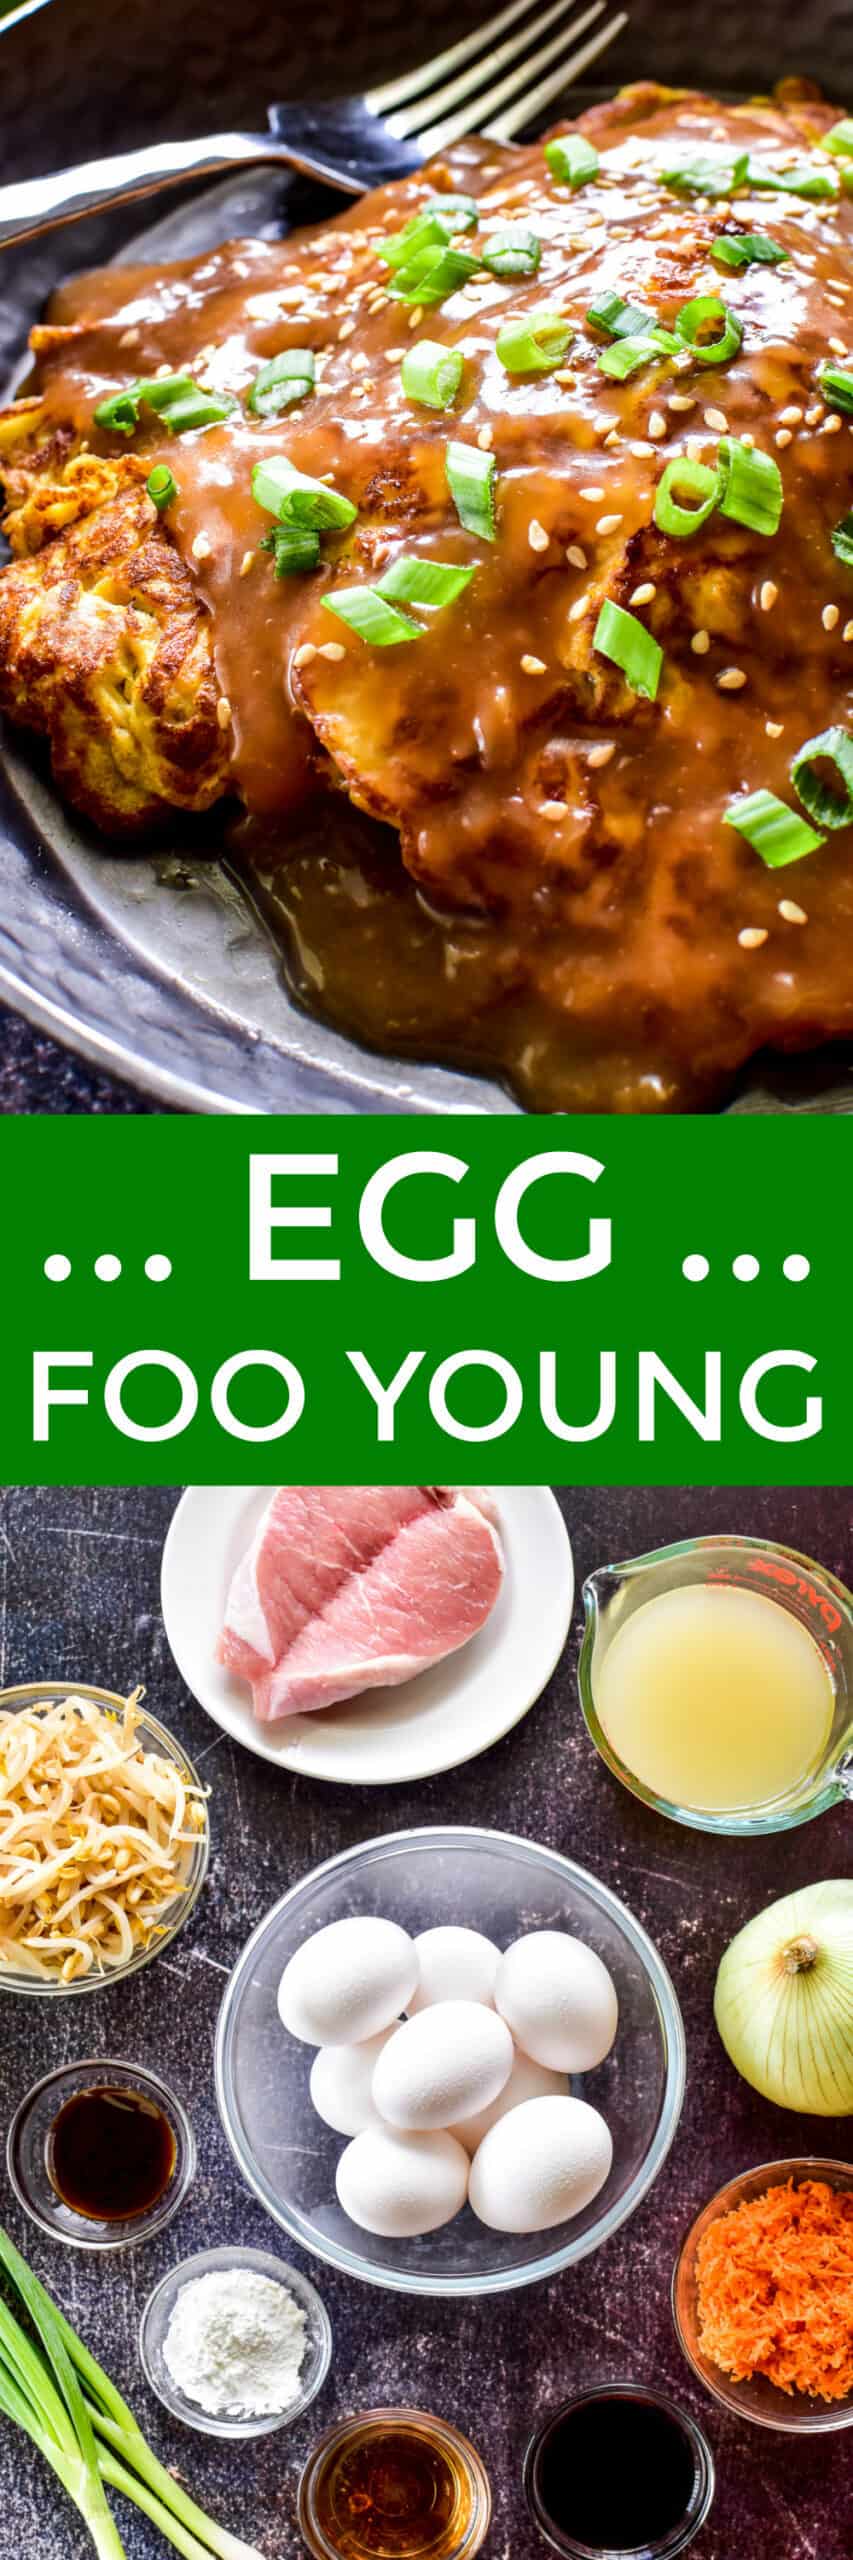 Egg Foo Young collage image